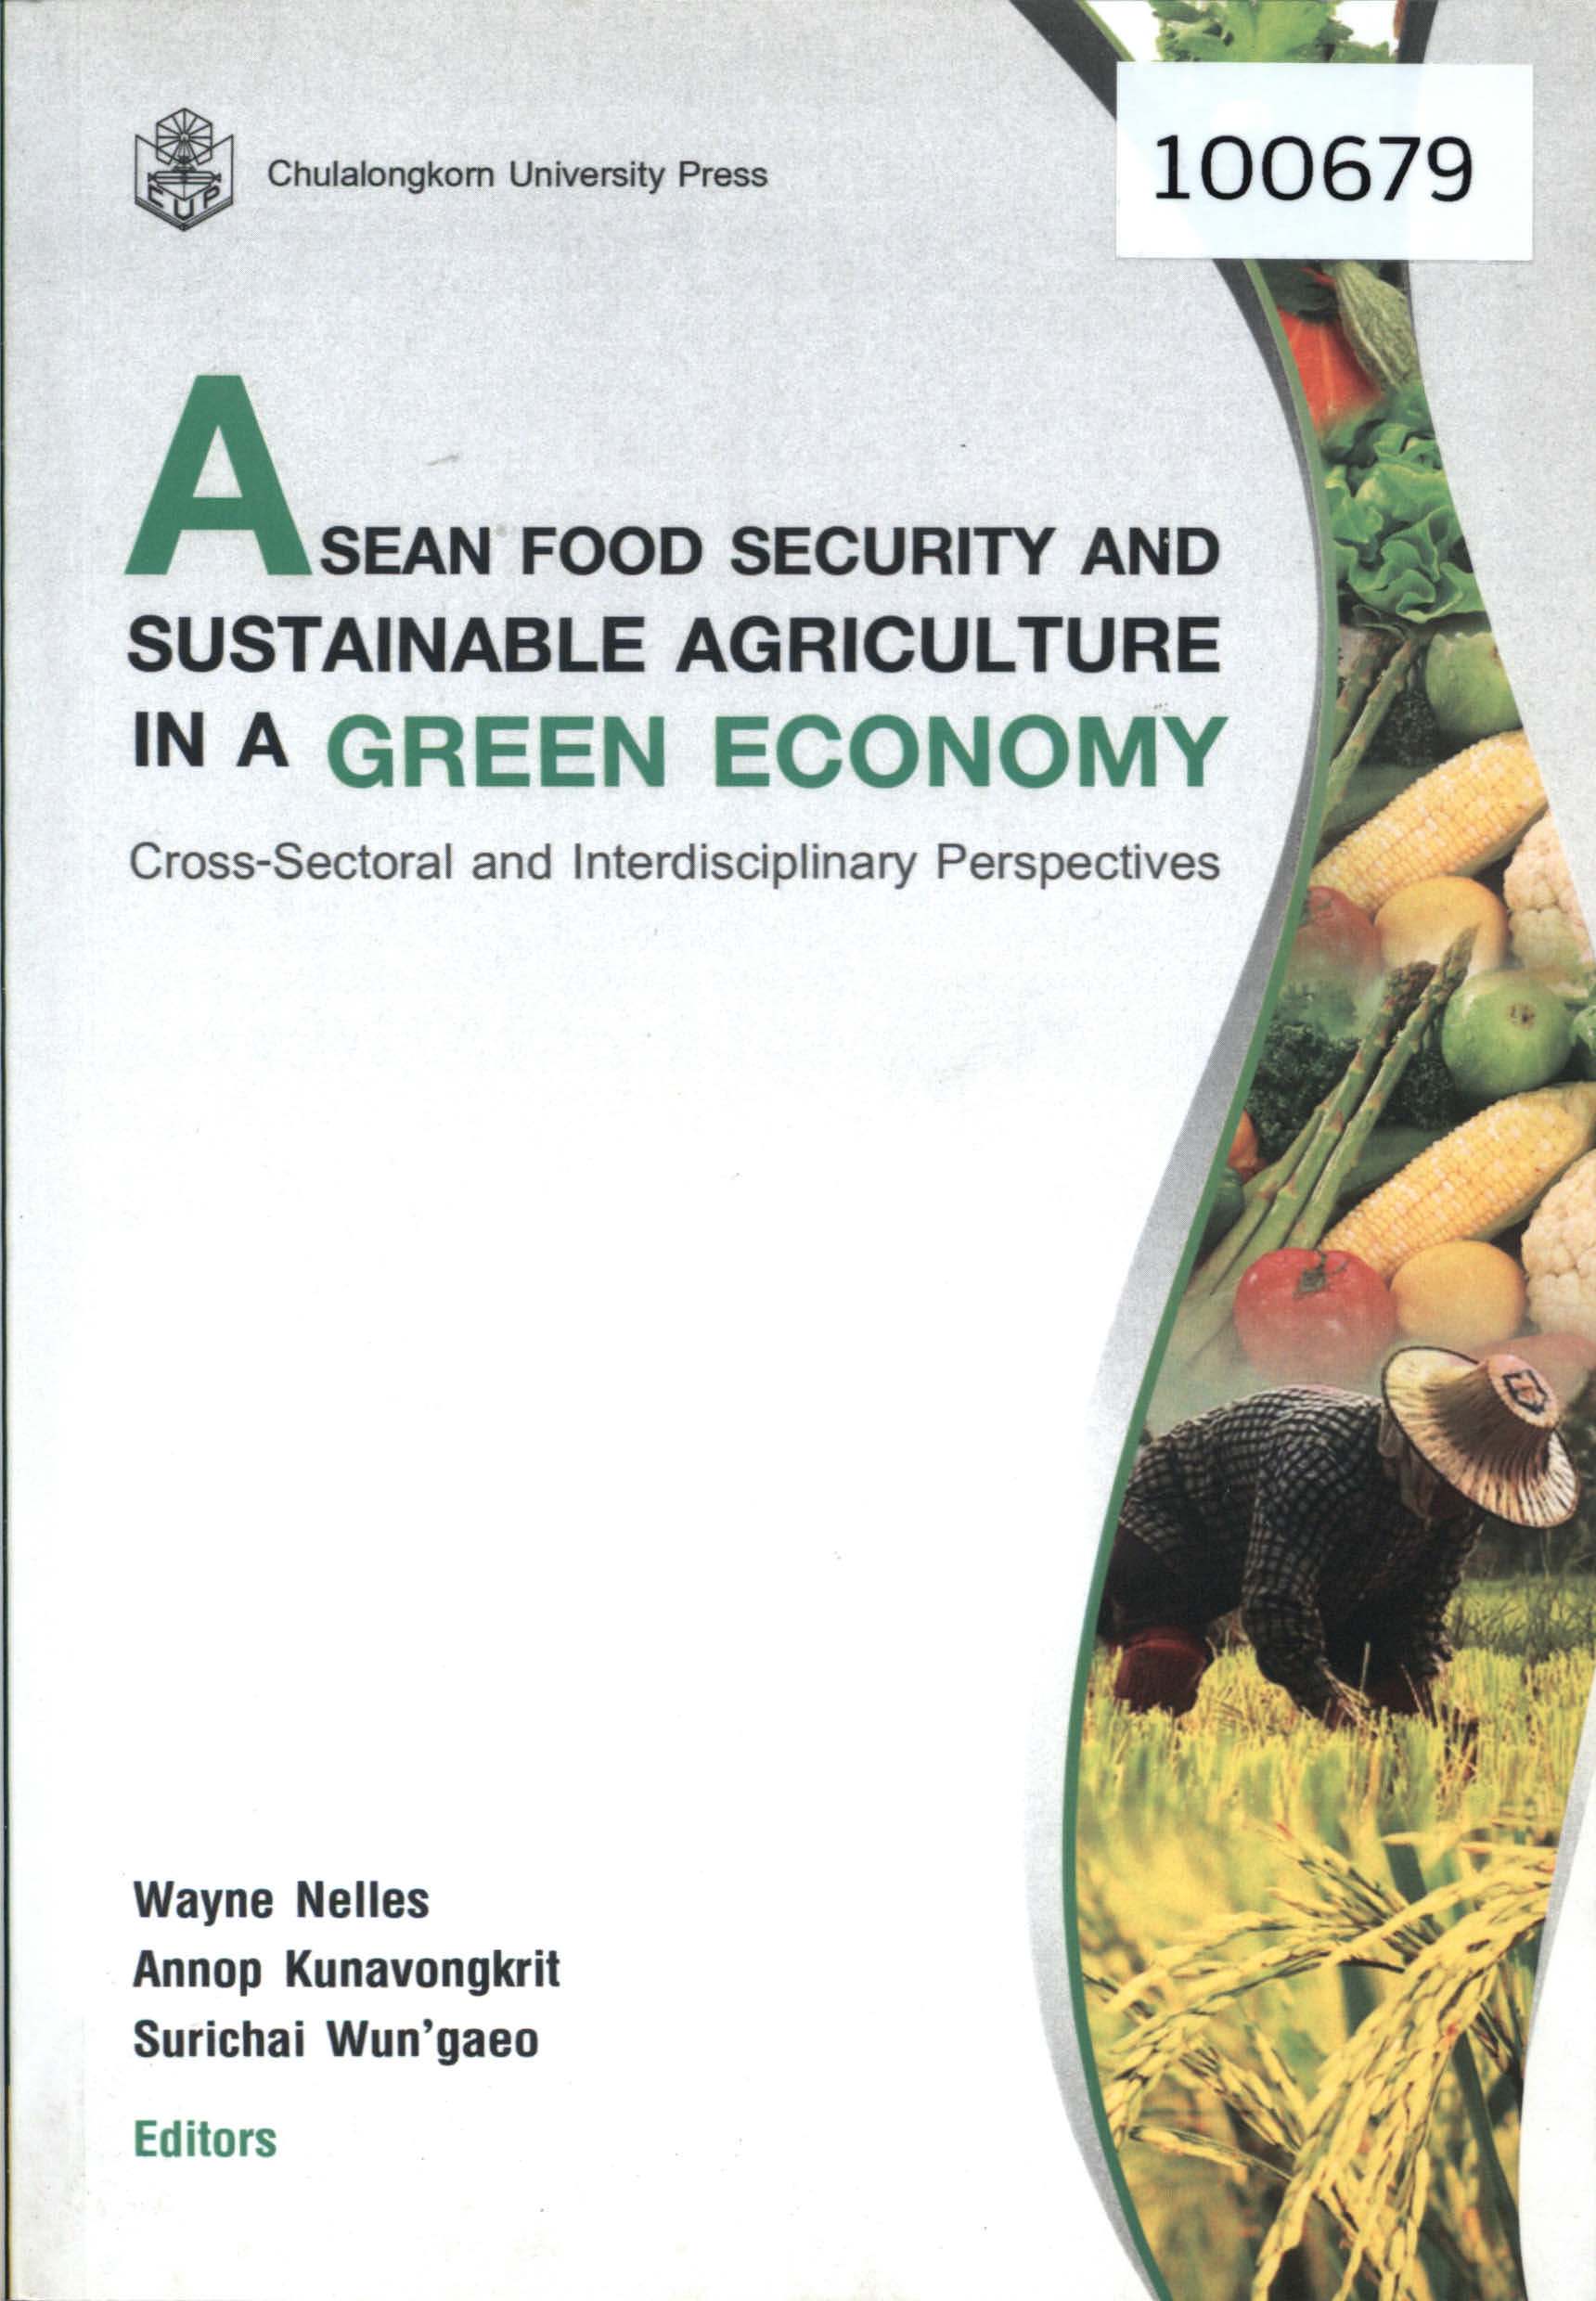 ASEAN Food Security and Sustainable Agriculture in a Green Economy: Cross-Sectoral and Interdisciplinary Perspectives